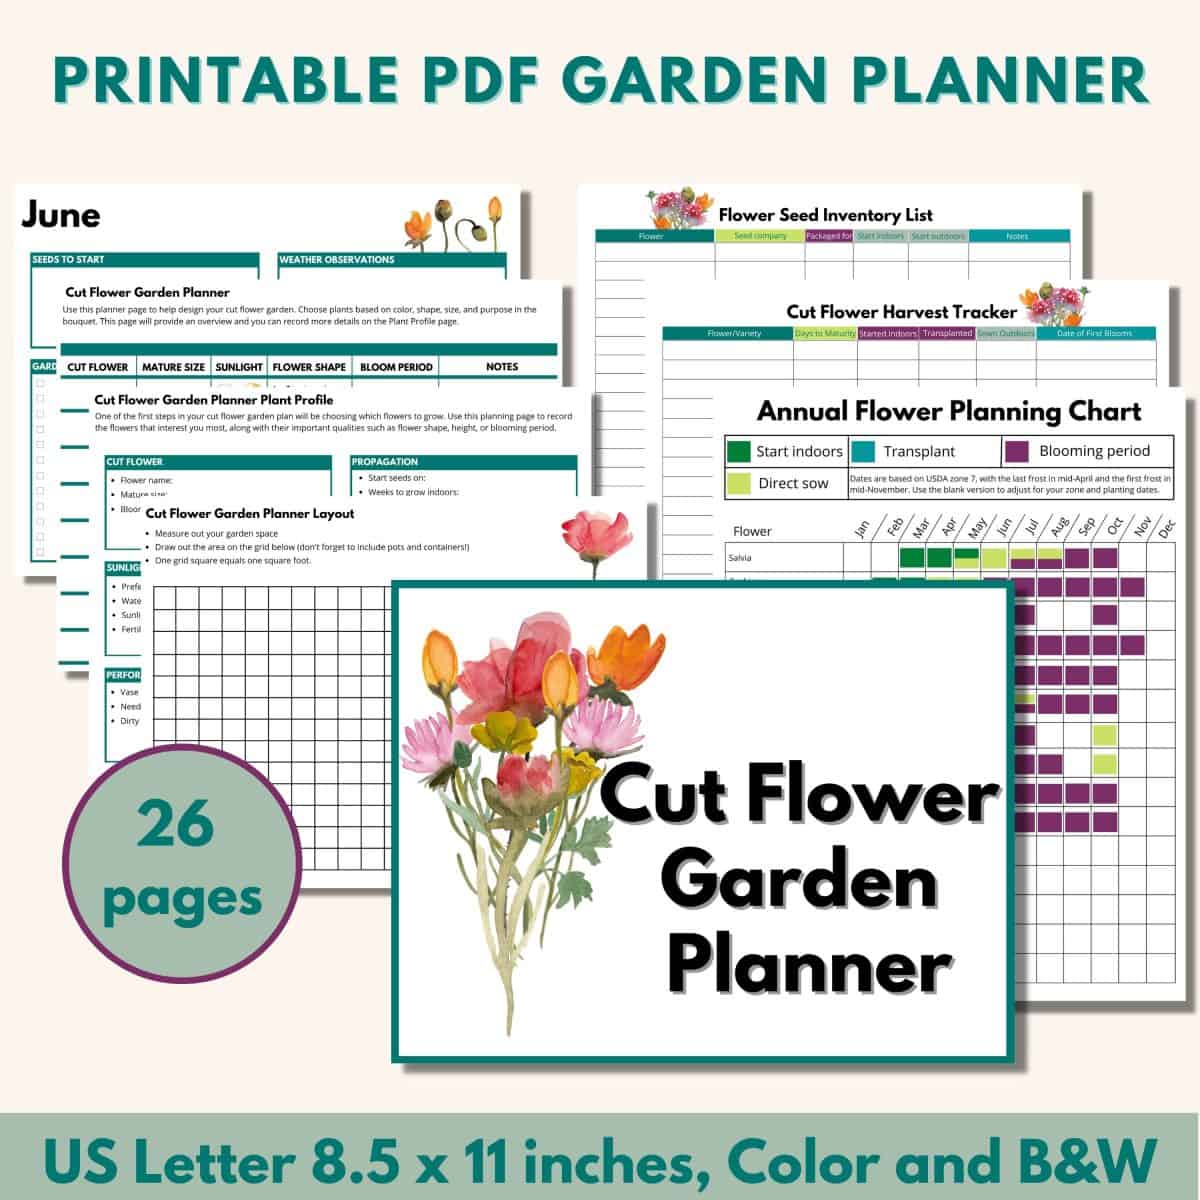 image of a PDF garden planner with 10 sample pages